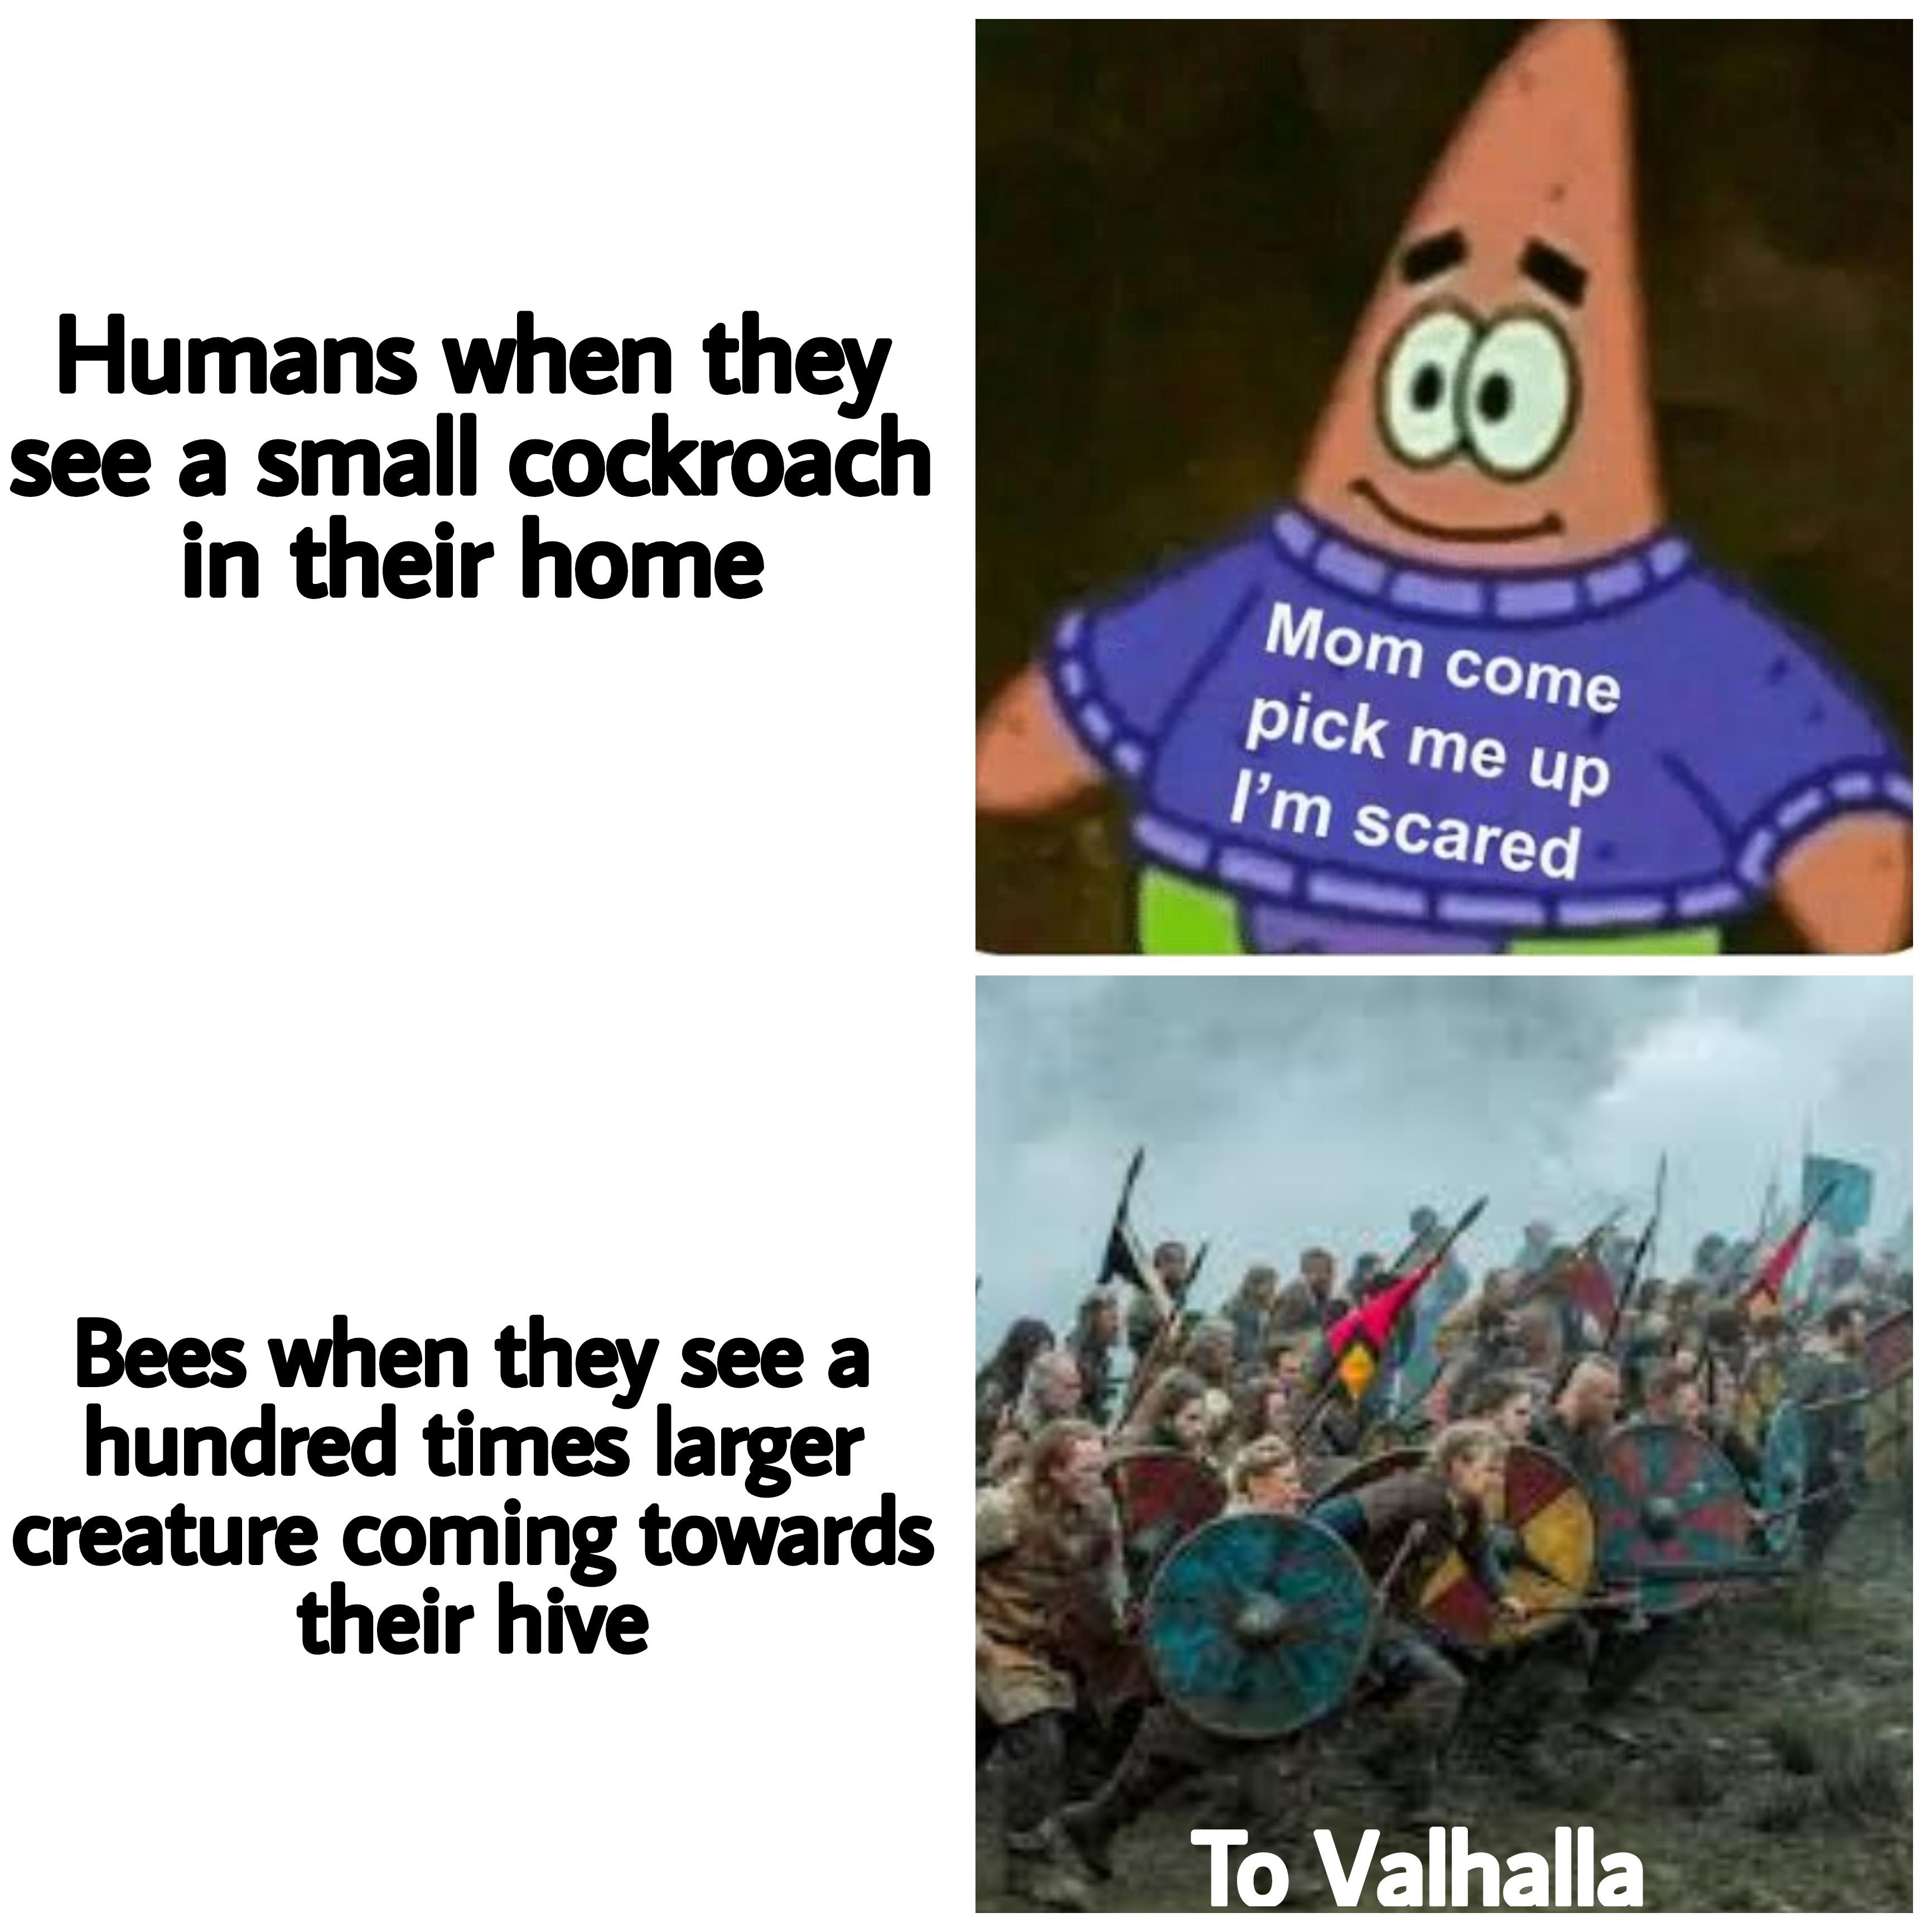 cartoon - Humans when they see a small cockroach in their home Co Mom come pick me up I'm scared Bees when they see a hundred times larger creature coming towards their hive To Valhalla